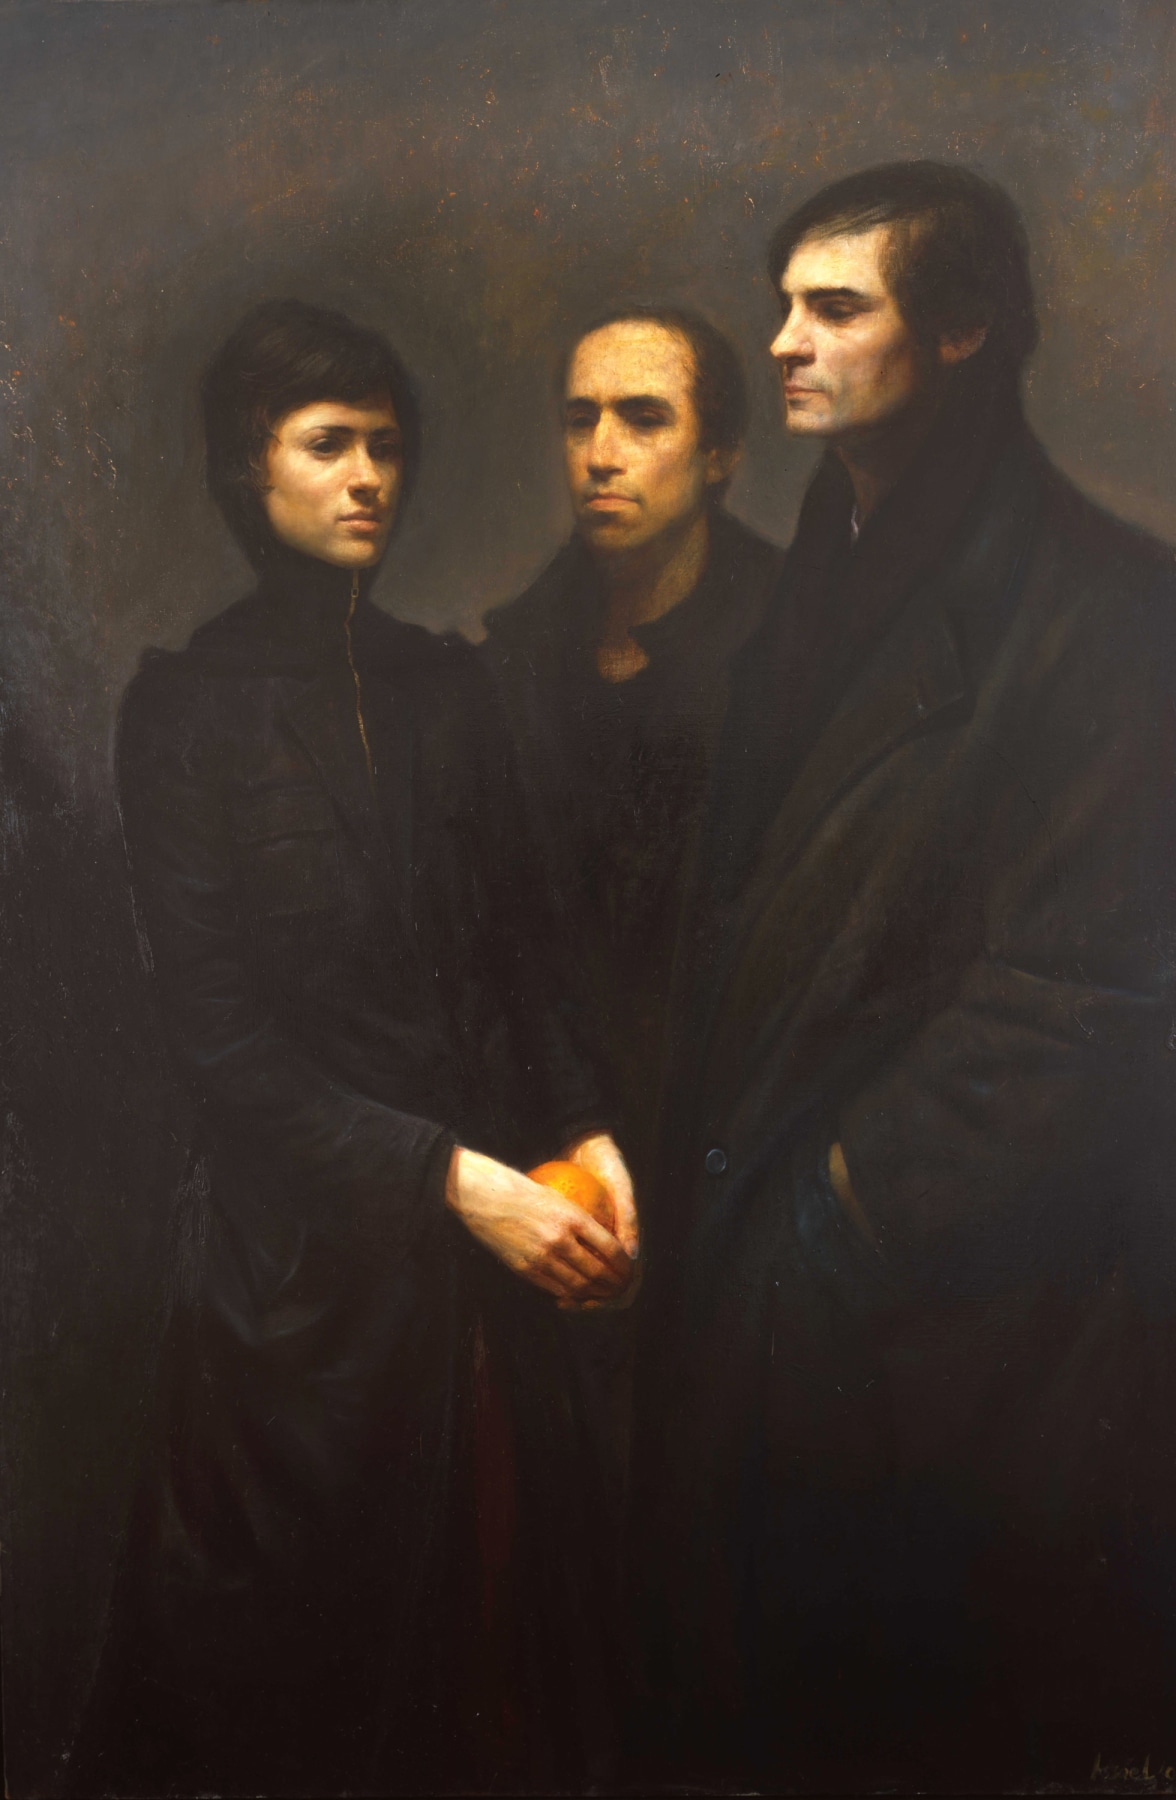 Steven Assael, Alex, Nathan, and Morgan, 2008, oil on canvas, 71 x 48 inches